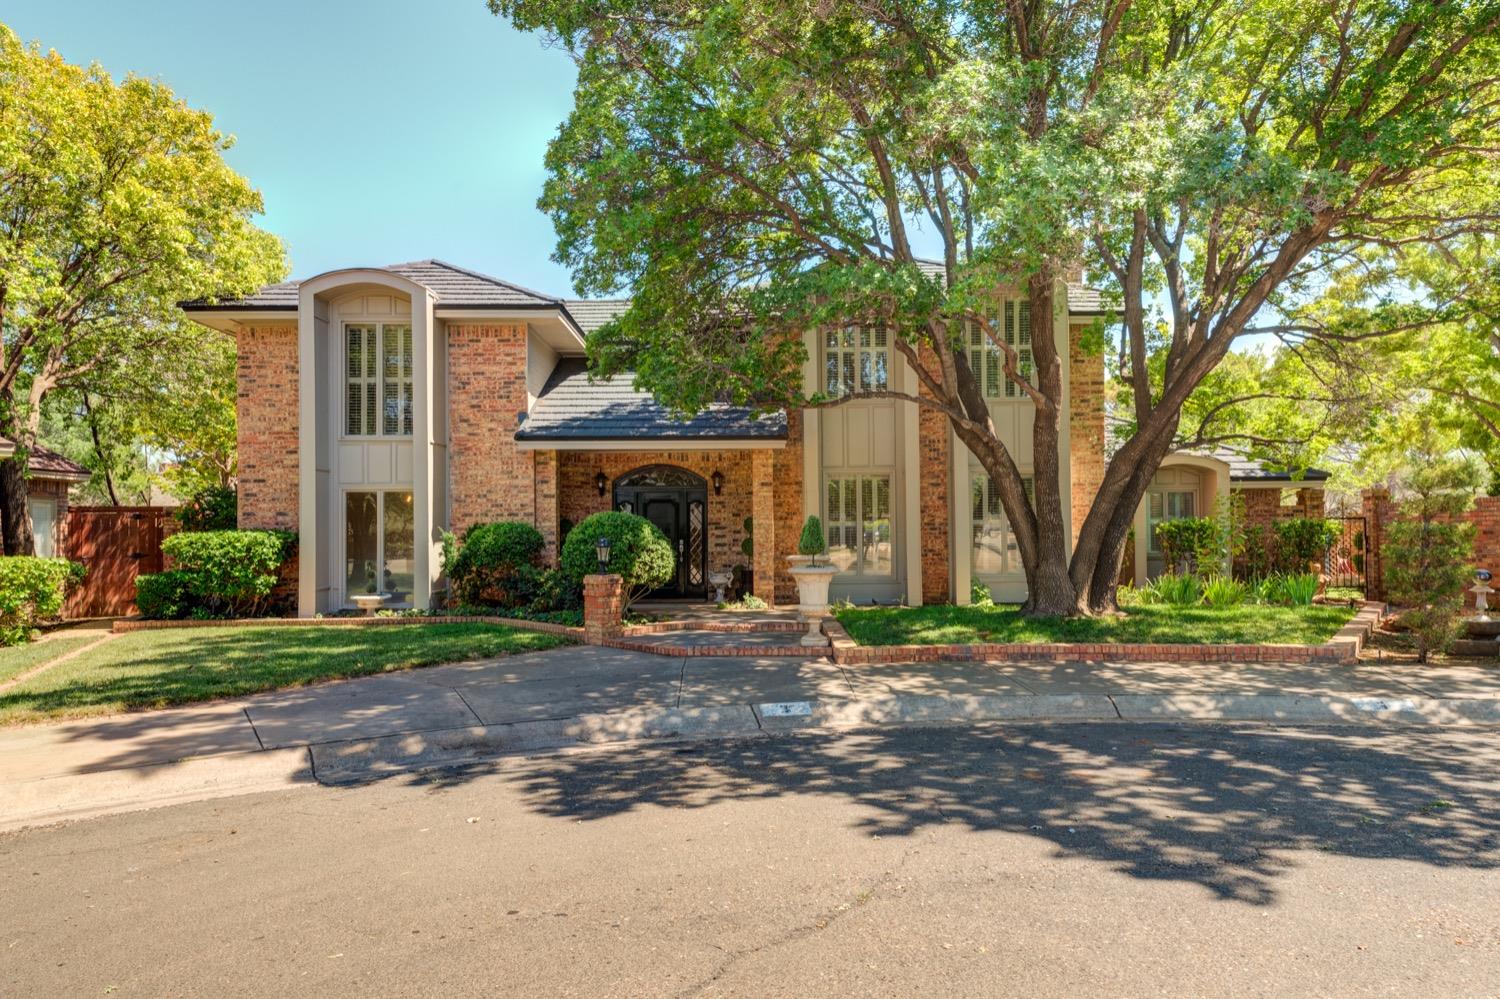 Designed by famed architect Deane Pierce, this home sits on TWO lots in the Whisperwood neighborhood. Only 5 minutes to Texas Tech and both main Hospitals make this the perfect location. 3 bedrooms, 3 full bathrooms, 2 living areas, 2 dining areas, a bonus/game room upstairs, 2 courtyards, and a 3 car garage. You don't feel like you're in West Texas walking into the oasis that the bonus lot offers. It has a secret garden feel. A well to irrigate everything, lush trees and landscape, brick wall fence, landscape lighting throughout, a water feature, and gazebo. And don't miss the Class 4 hail resistant Stone Coated Steel roof on the house. It is rare for a home like this to come available on the quiet Whisperwood Circle. So come see this property in person to appreciate it.